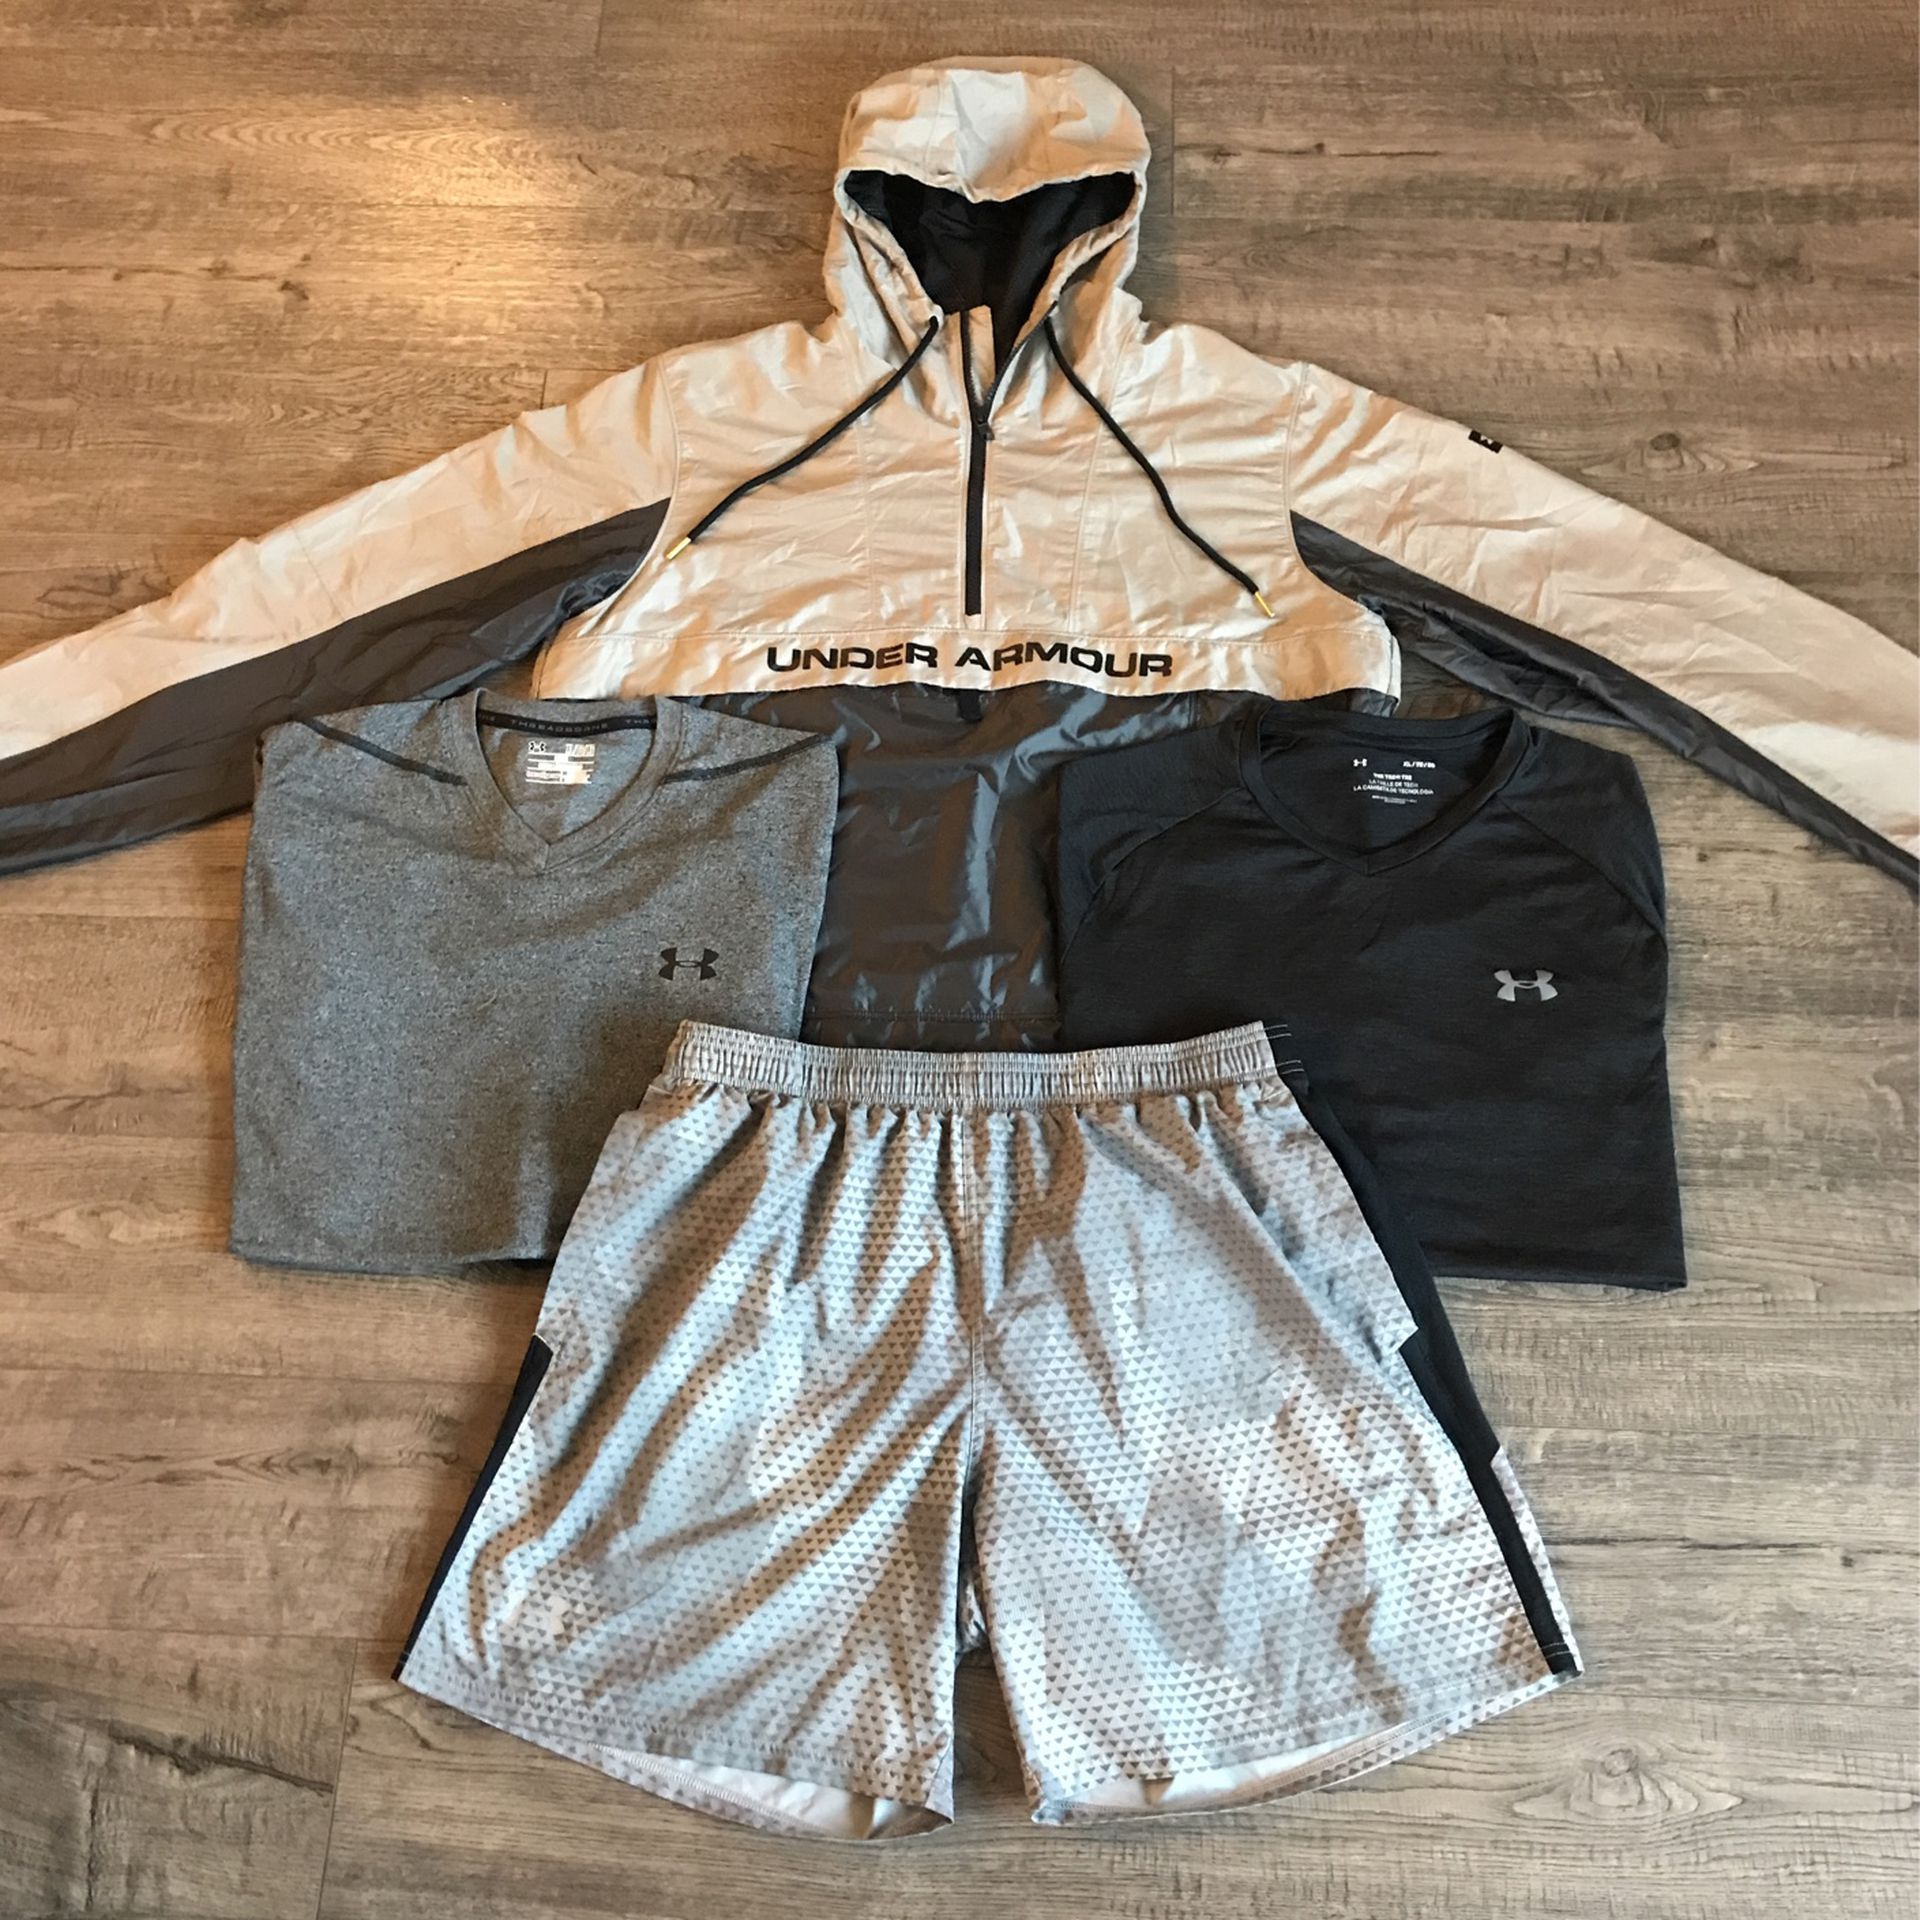 Under Armour Men’s Clothes for Sale in Tacoma, WA - OfferUp